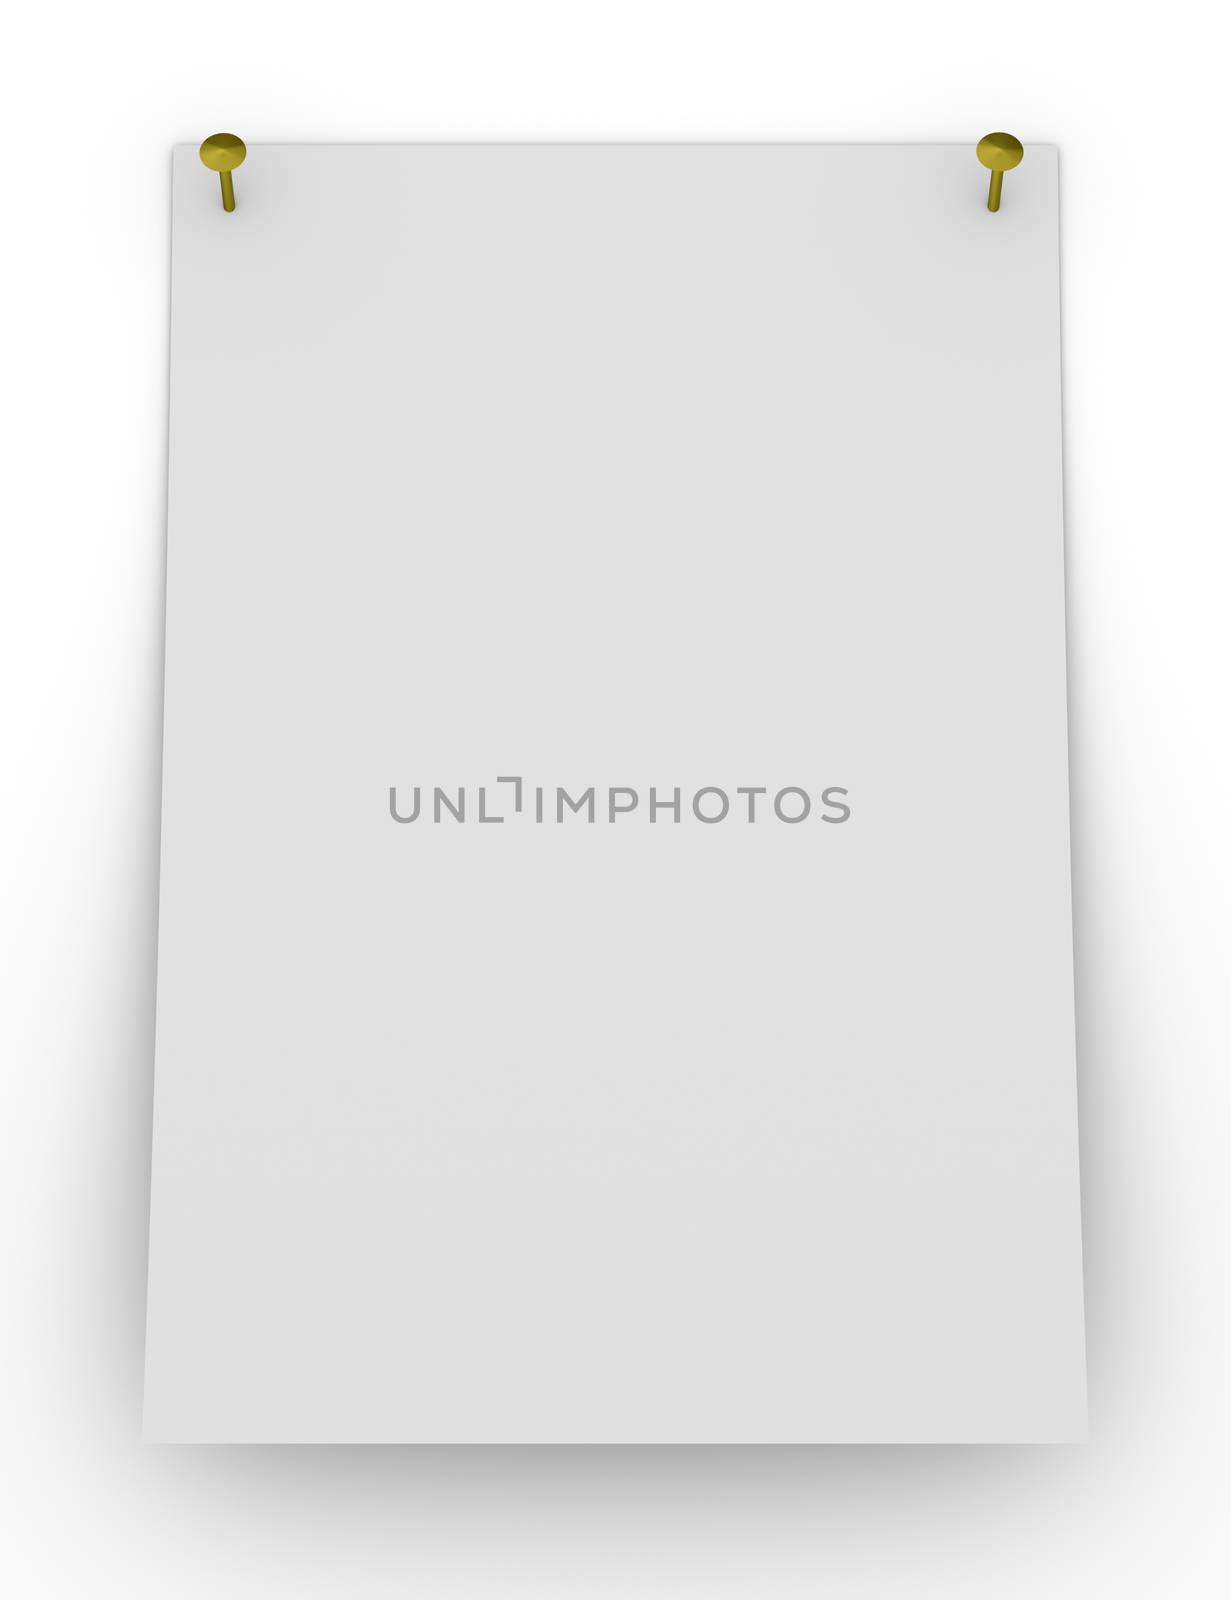 Grey sticker label isolated on white background